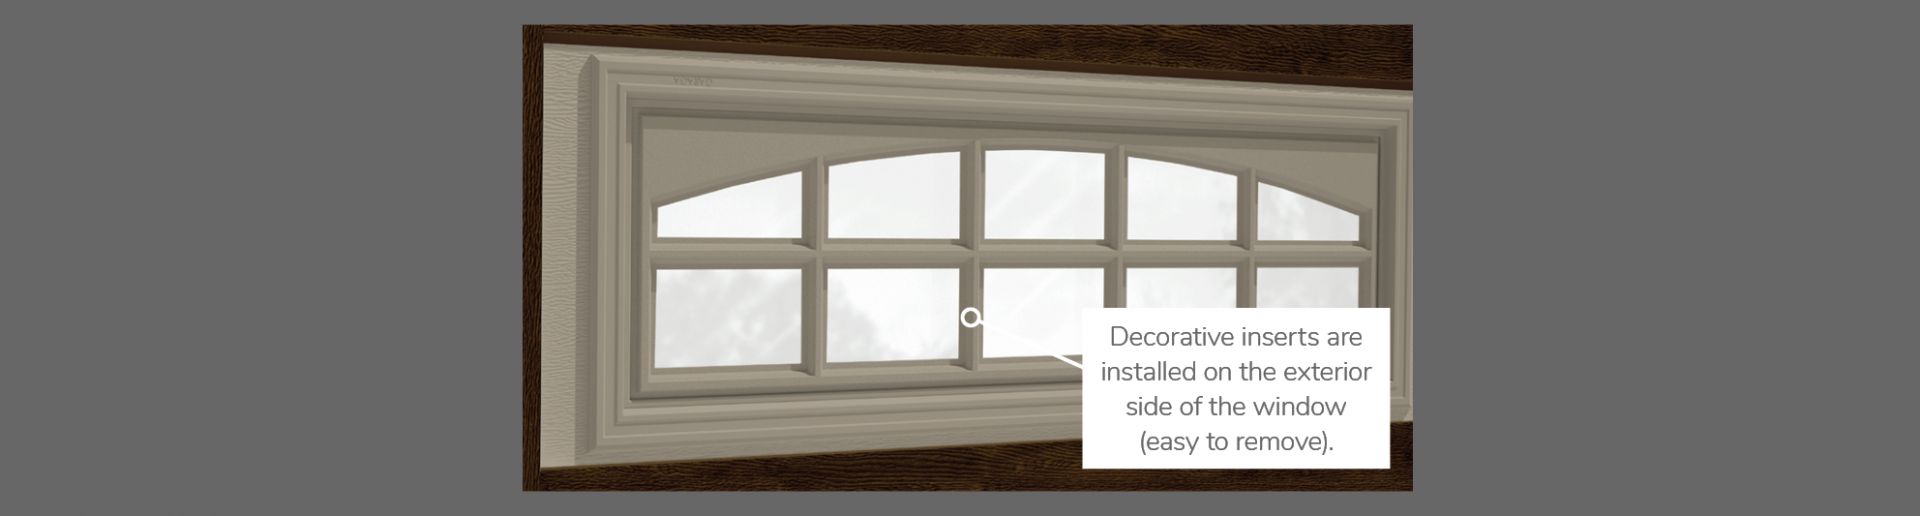 Cascade Decorative Insert, 40" x 13", available for door R-16